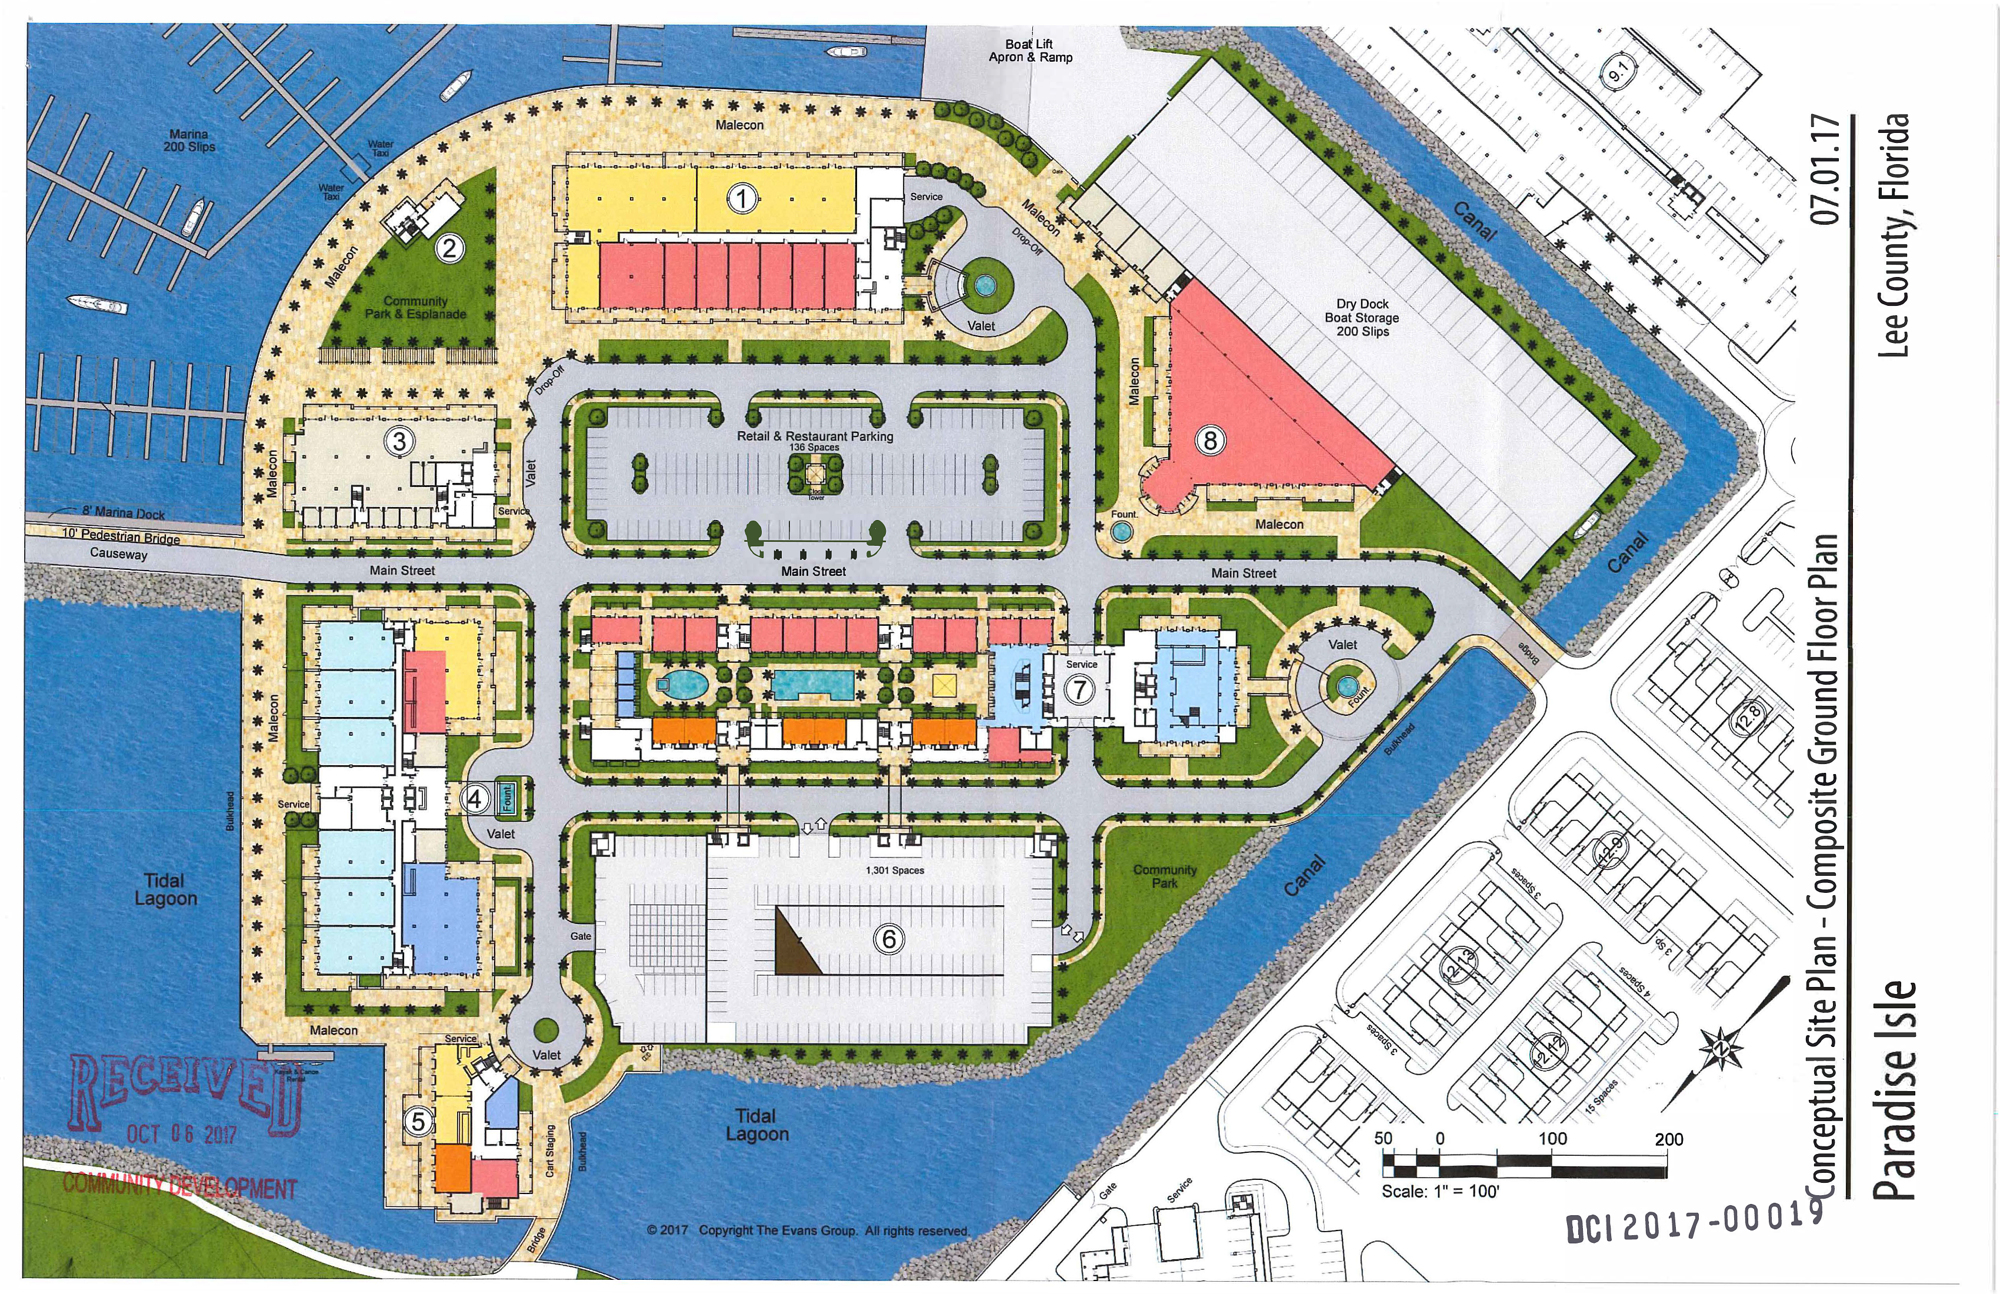 Site plan of the 